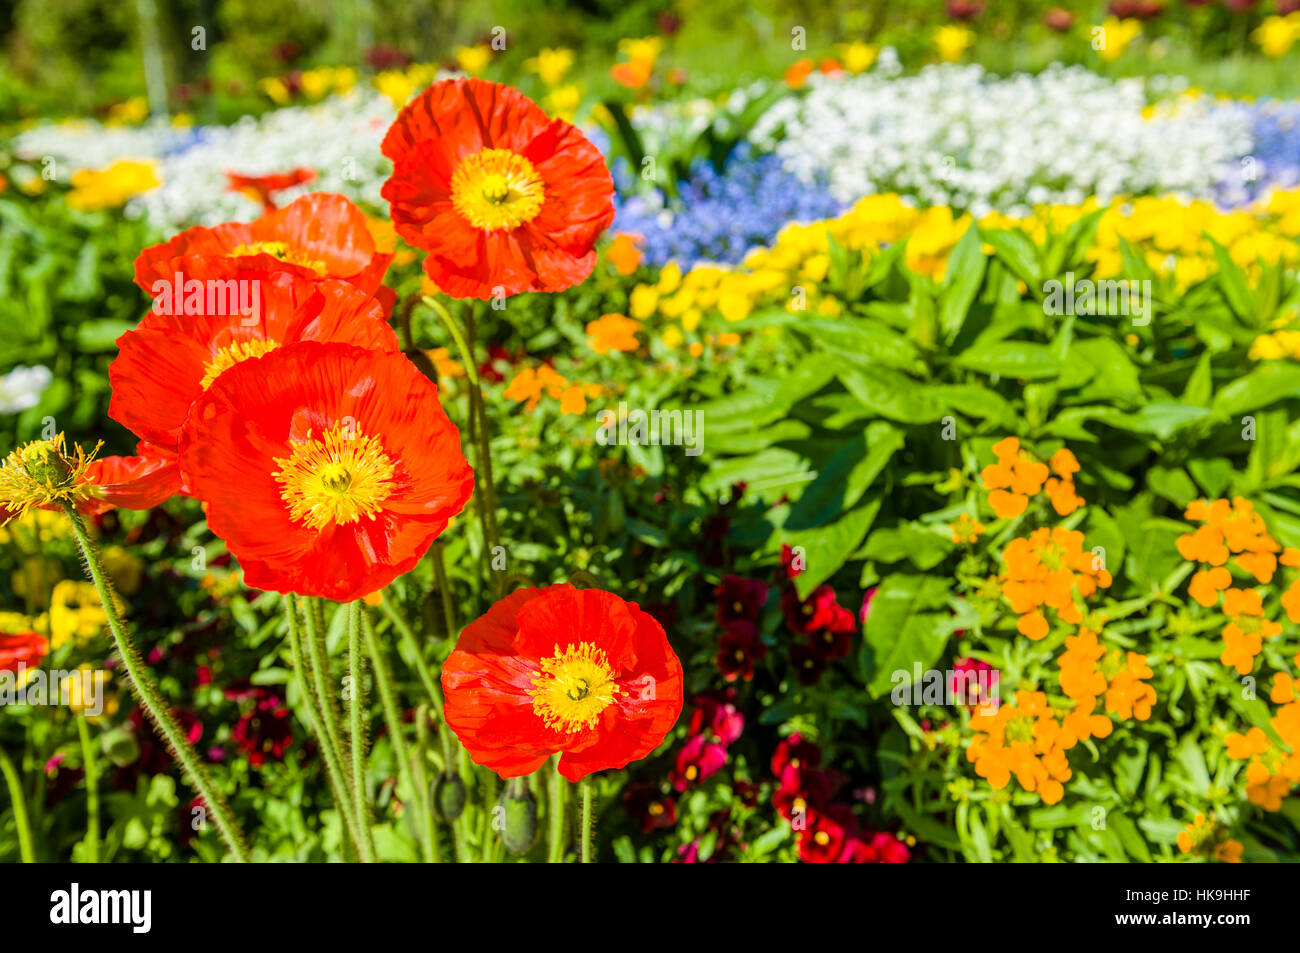 Red Poppy Seed (lat. papaver papaveris) and different blooming flowers at Island Mainau, the 'Island of flowers' at Lake Constance Stock Photo